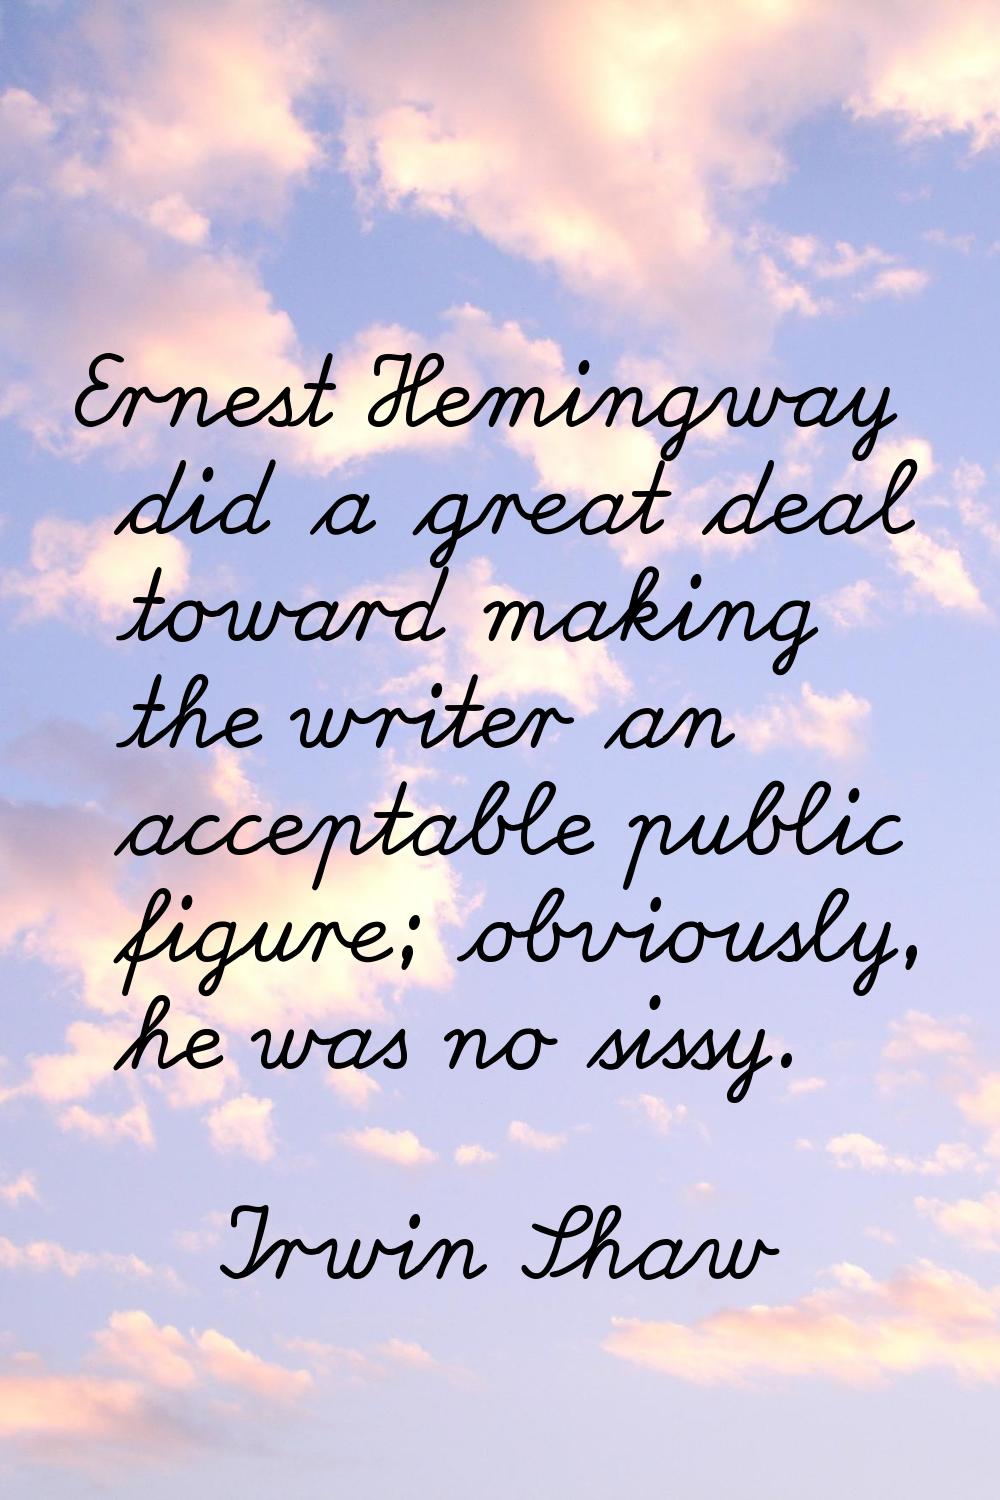 Ernest Hemingway did a great deal toward making the writer an acceptable public figure; obviously, 